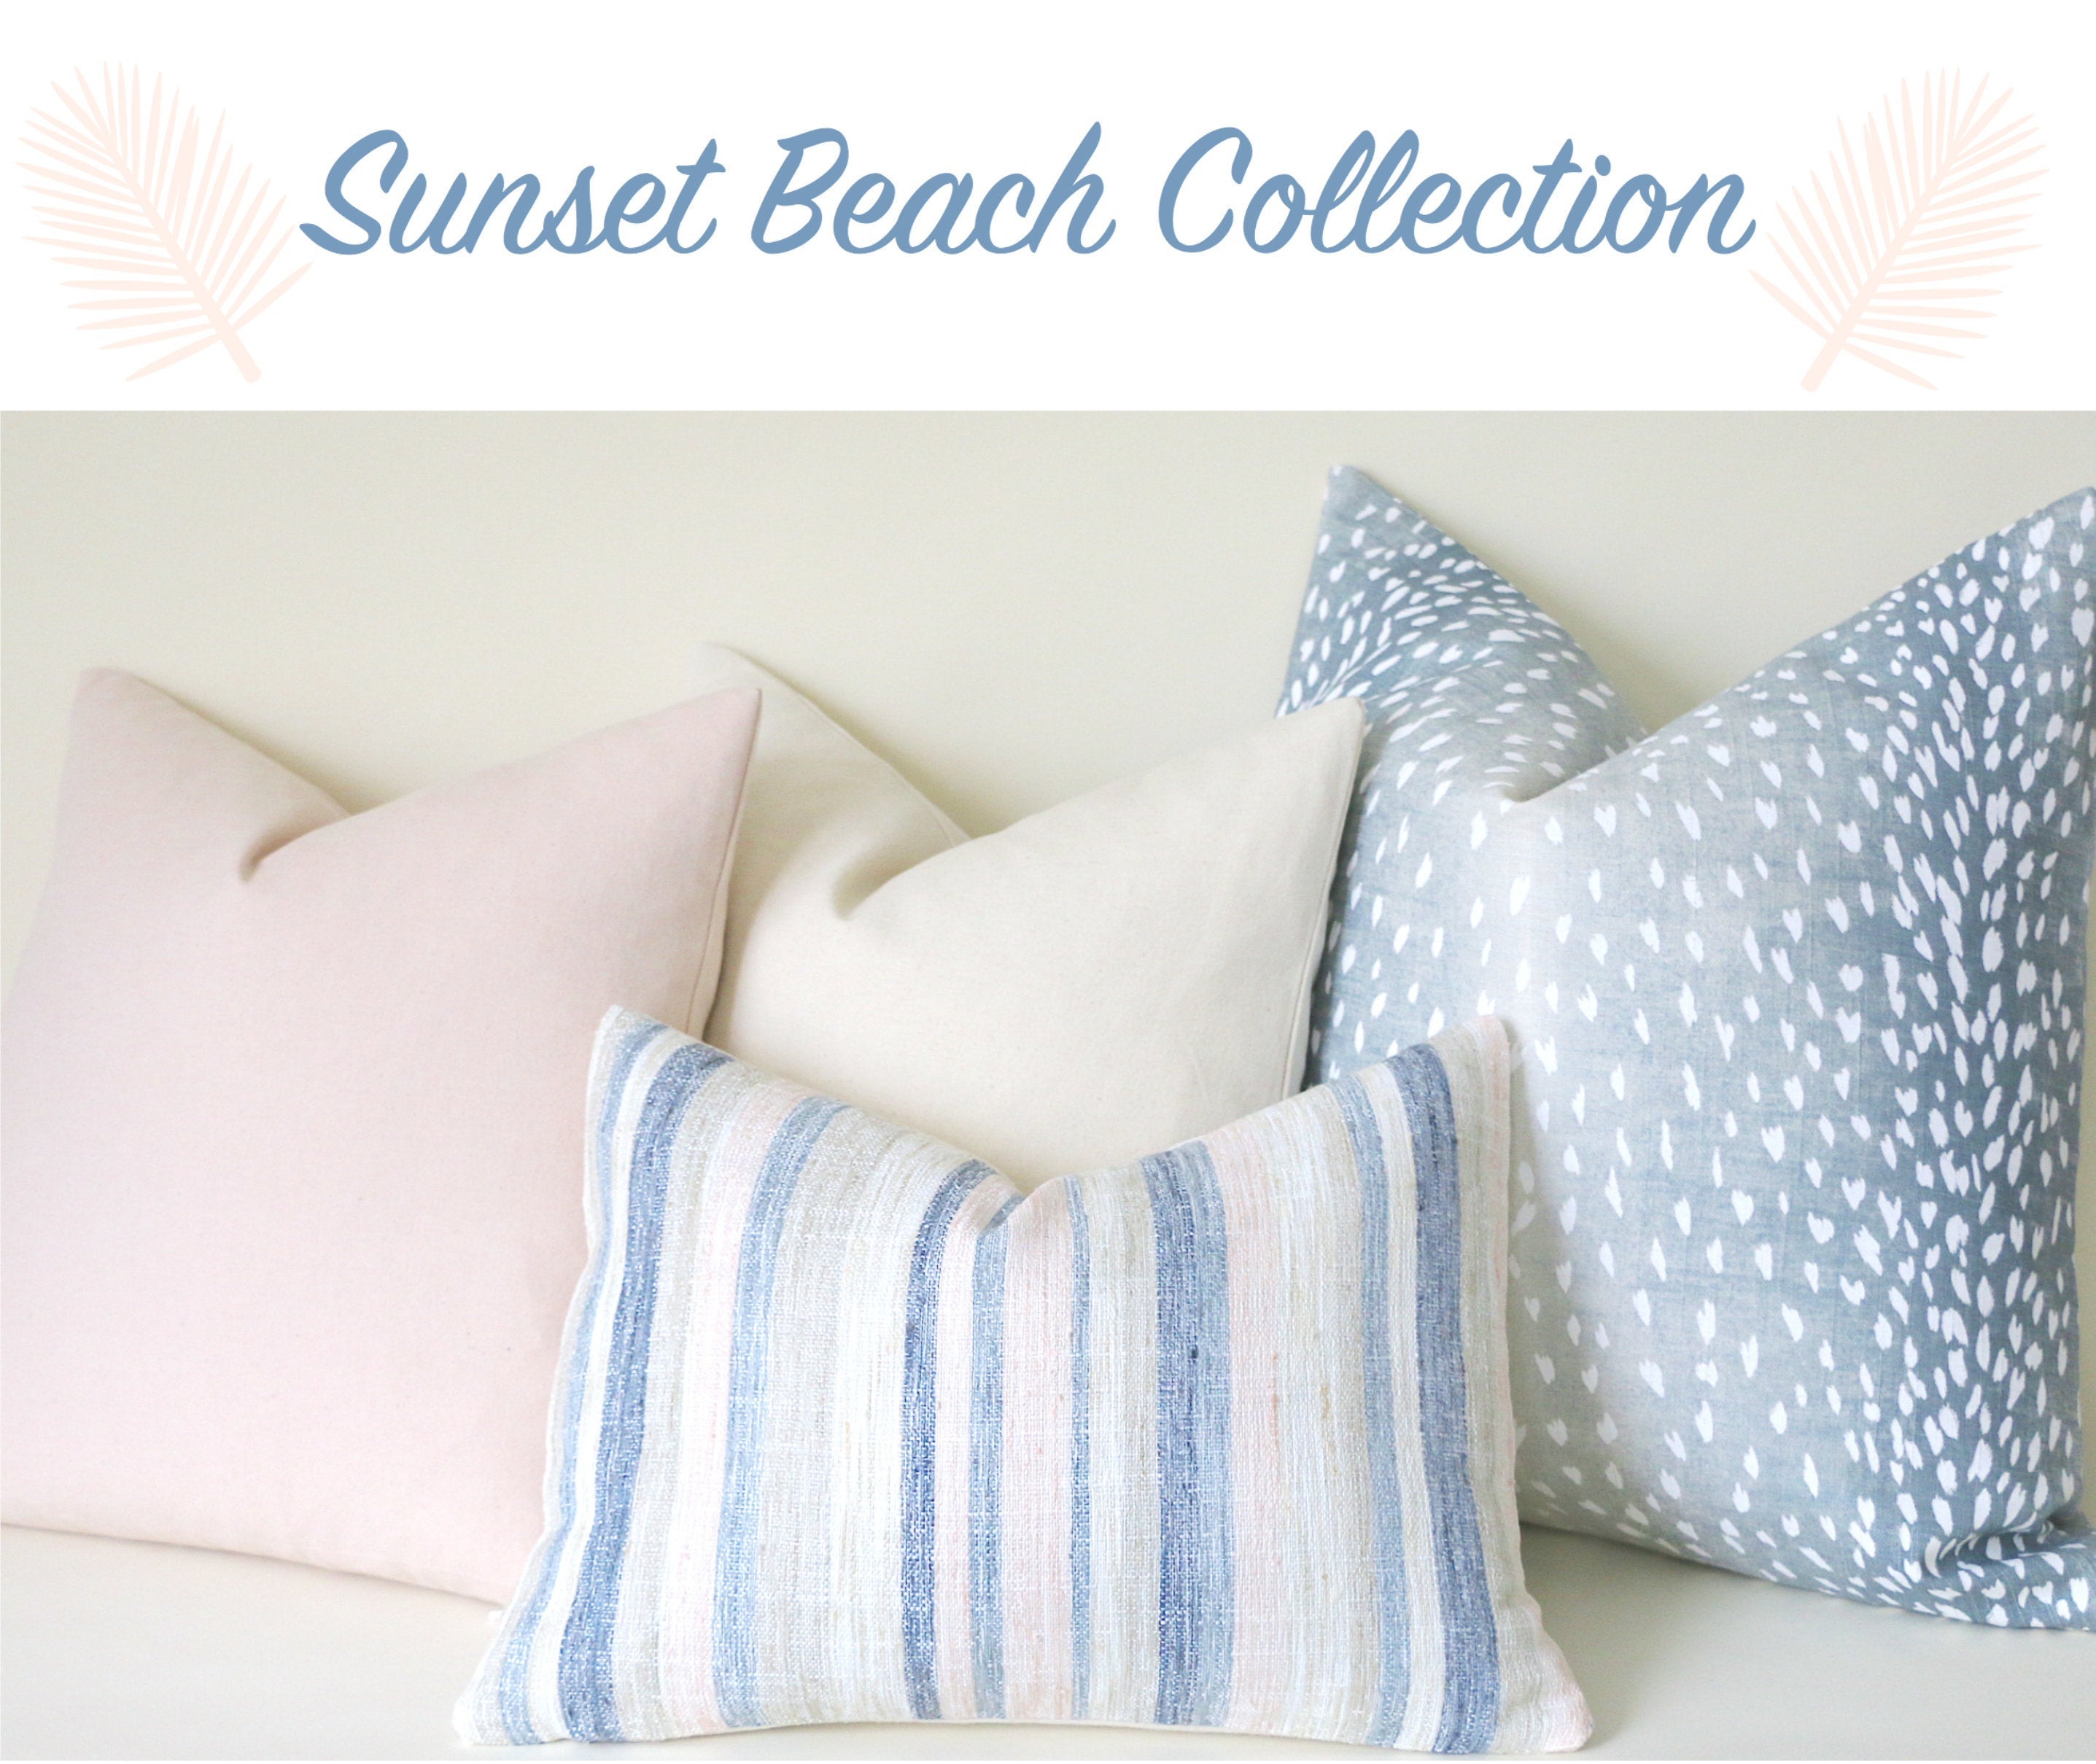 Sunset Beach Collection: Coordinated Pillow Covers in Blush